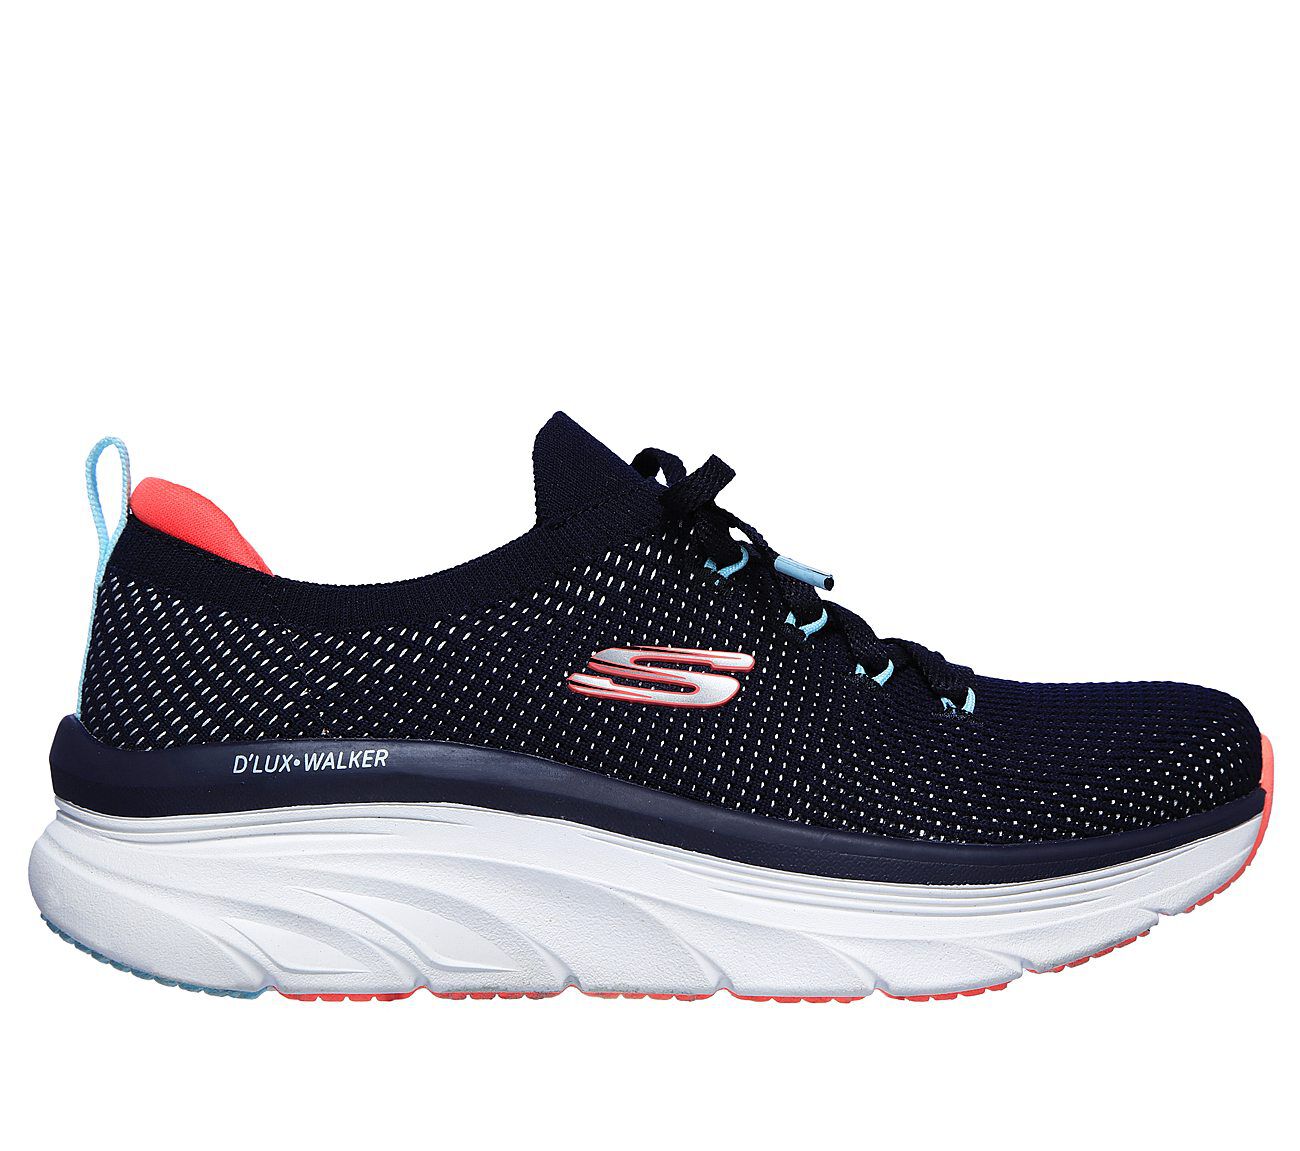 skechers relaxed fit air cooled memory foam women's shoes